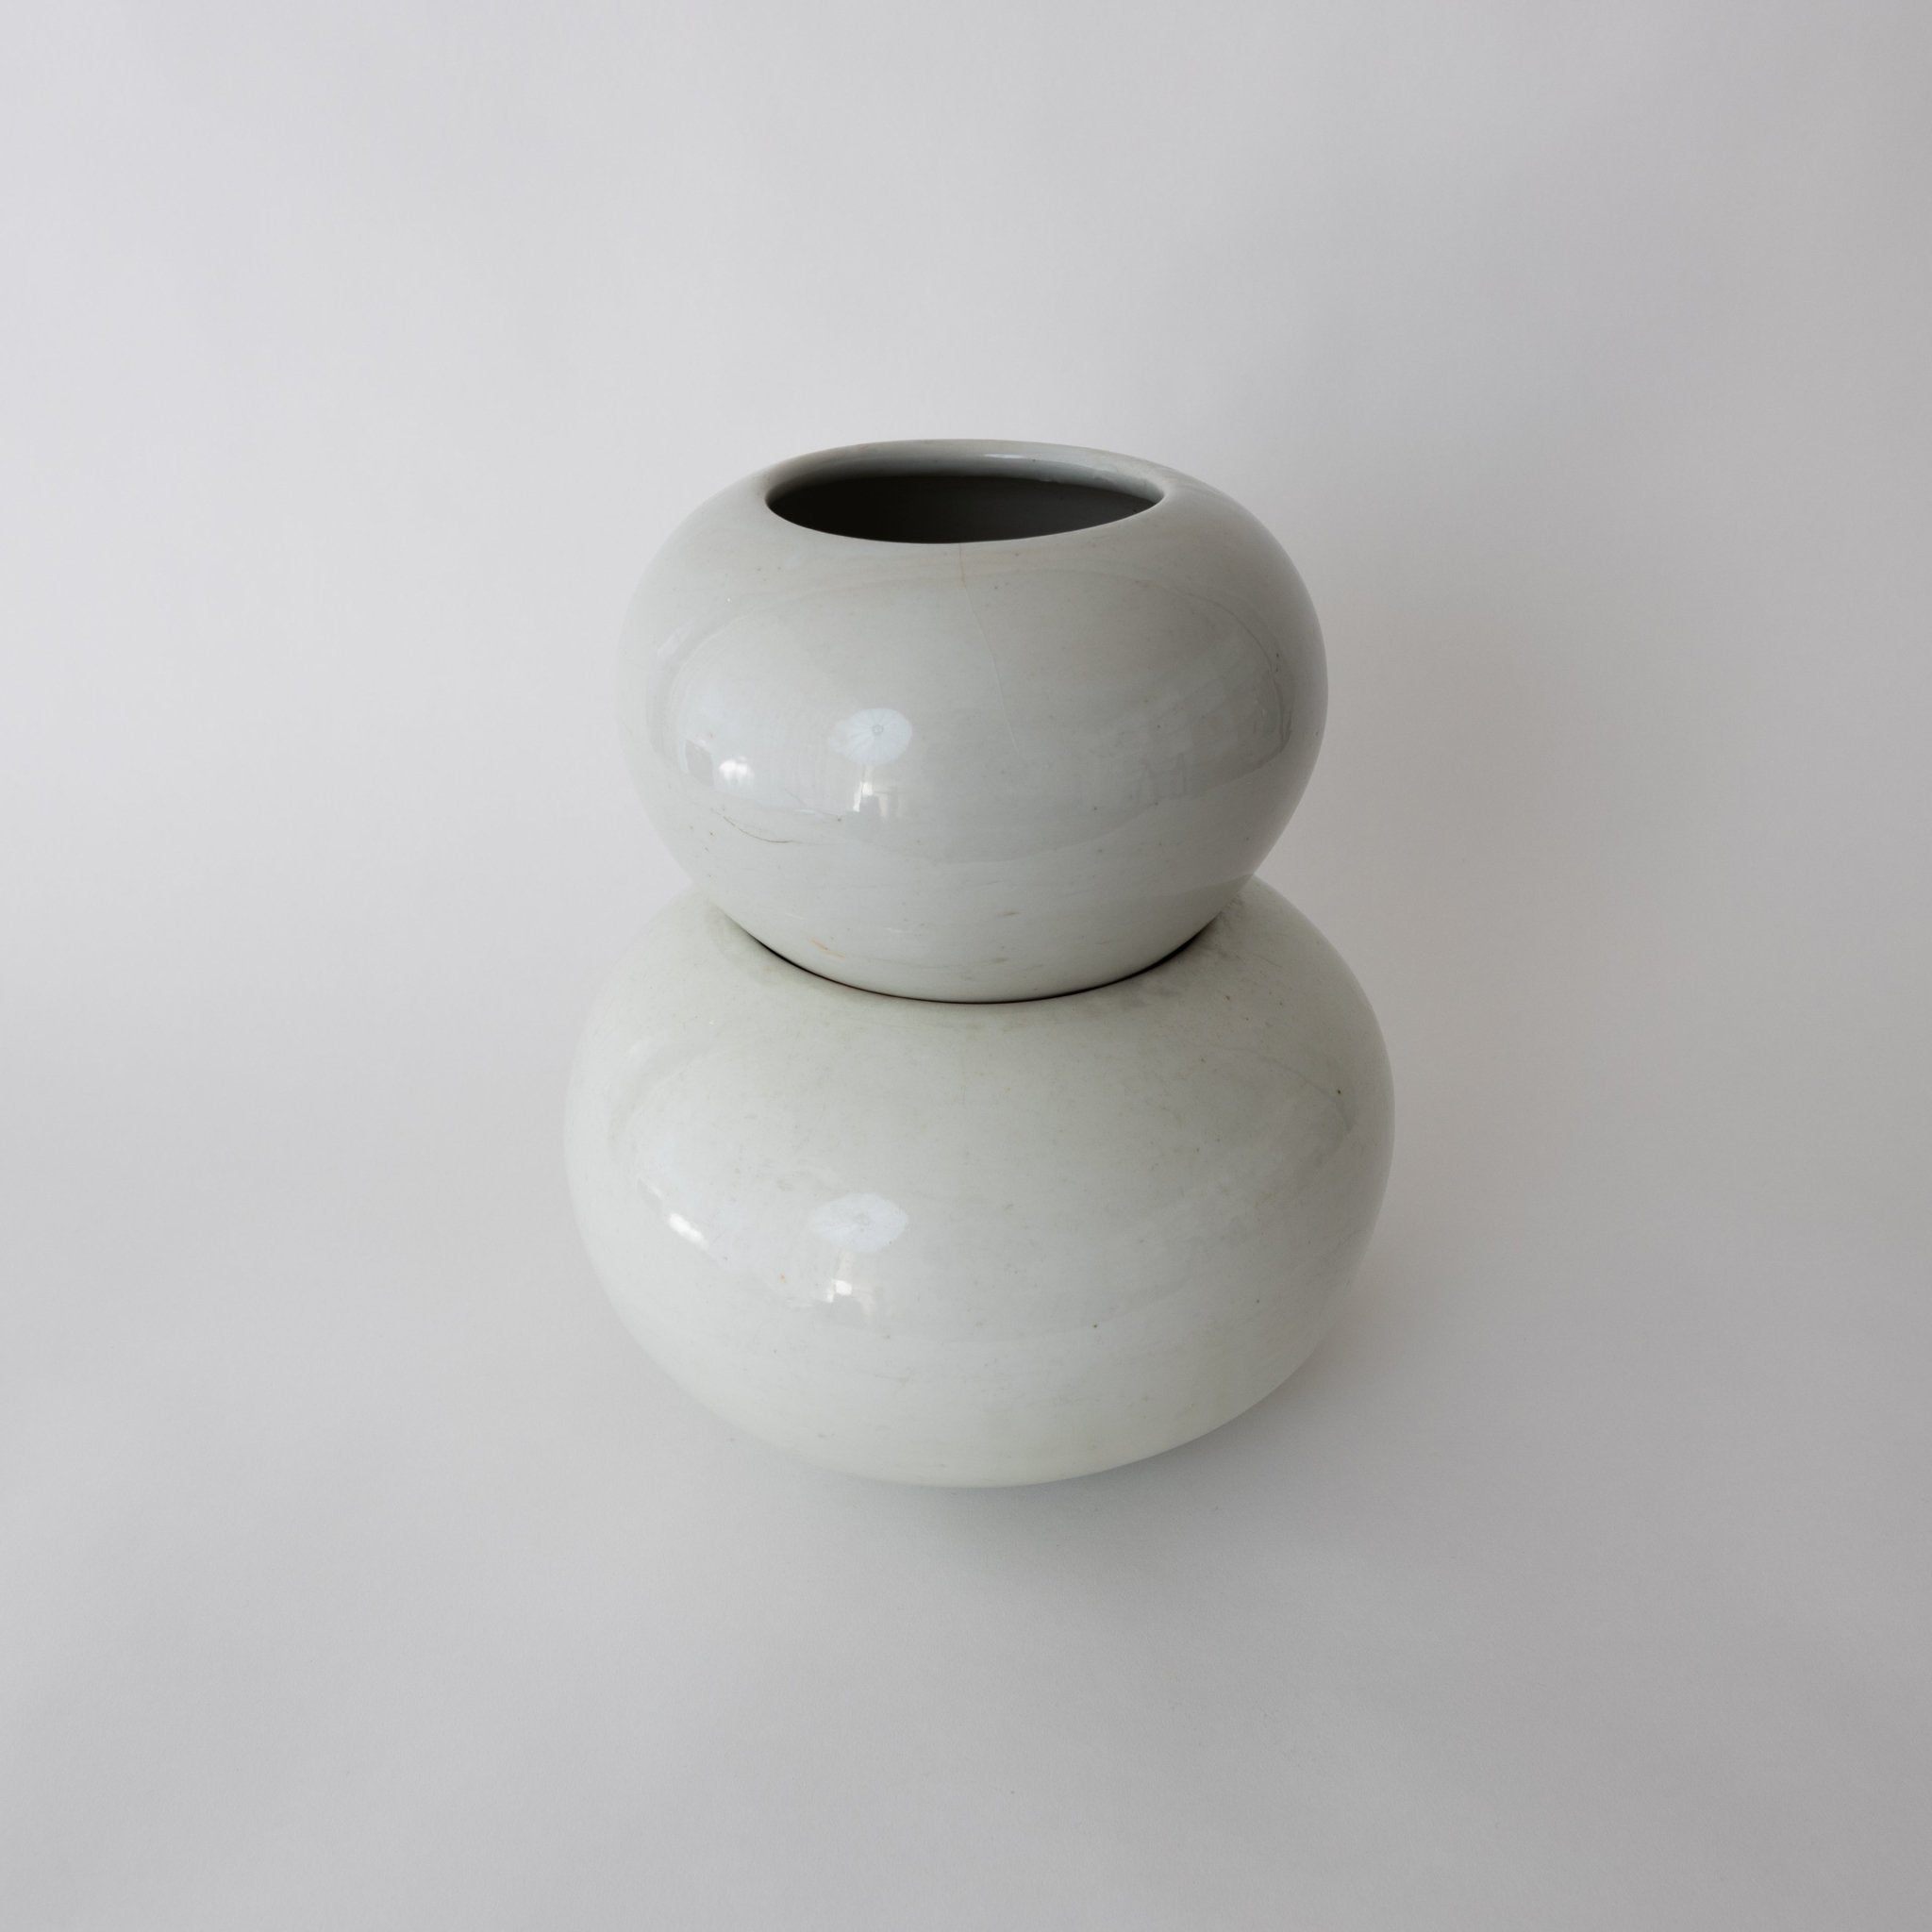 018 Unknown, Japan Porcelain Objects (Set of 2) | Tortoise General Store